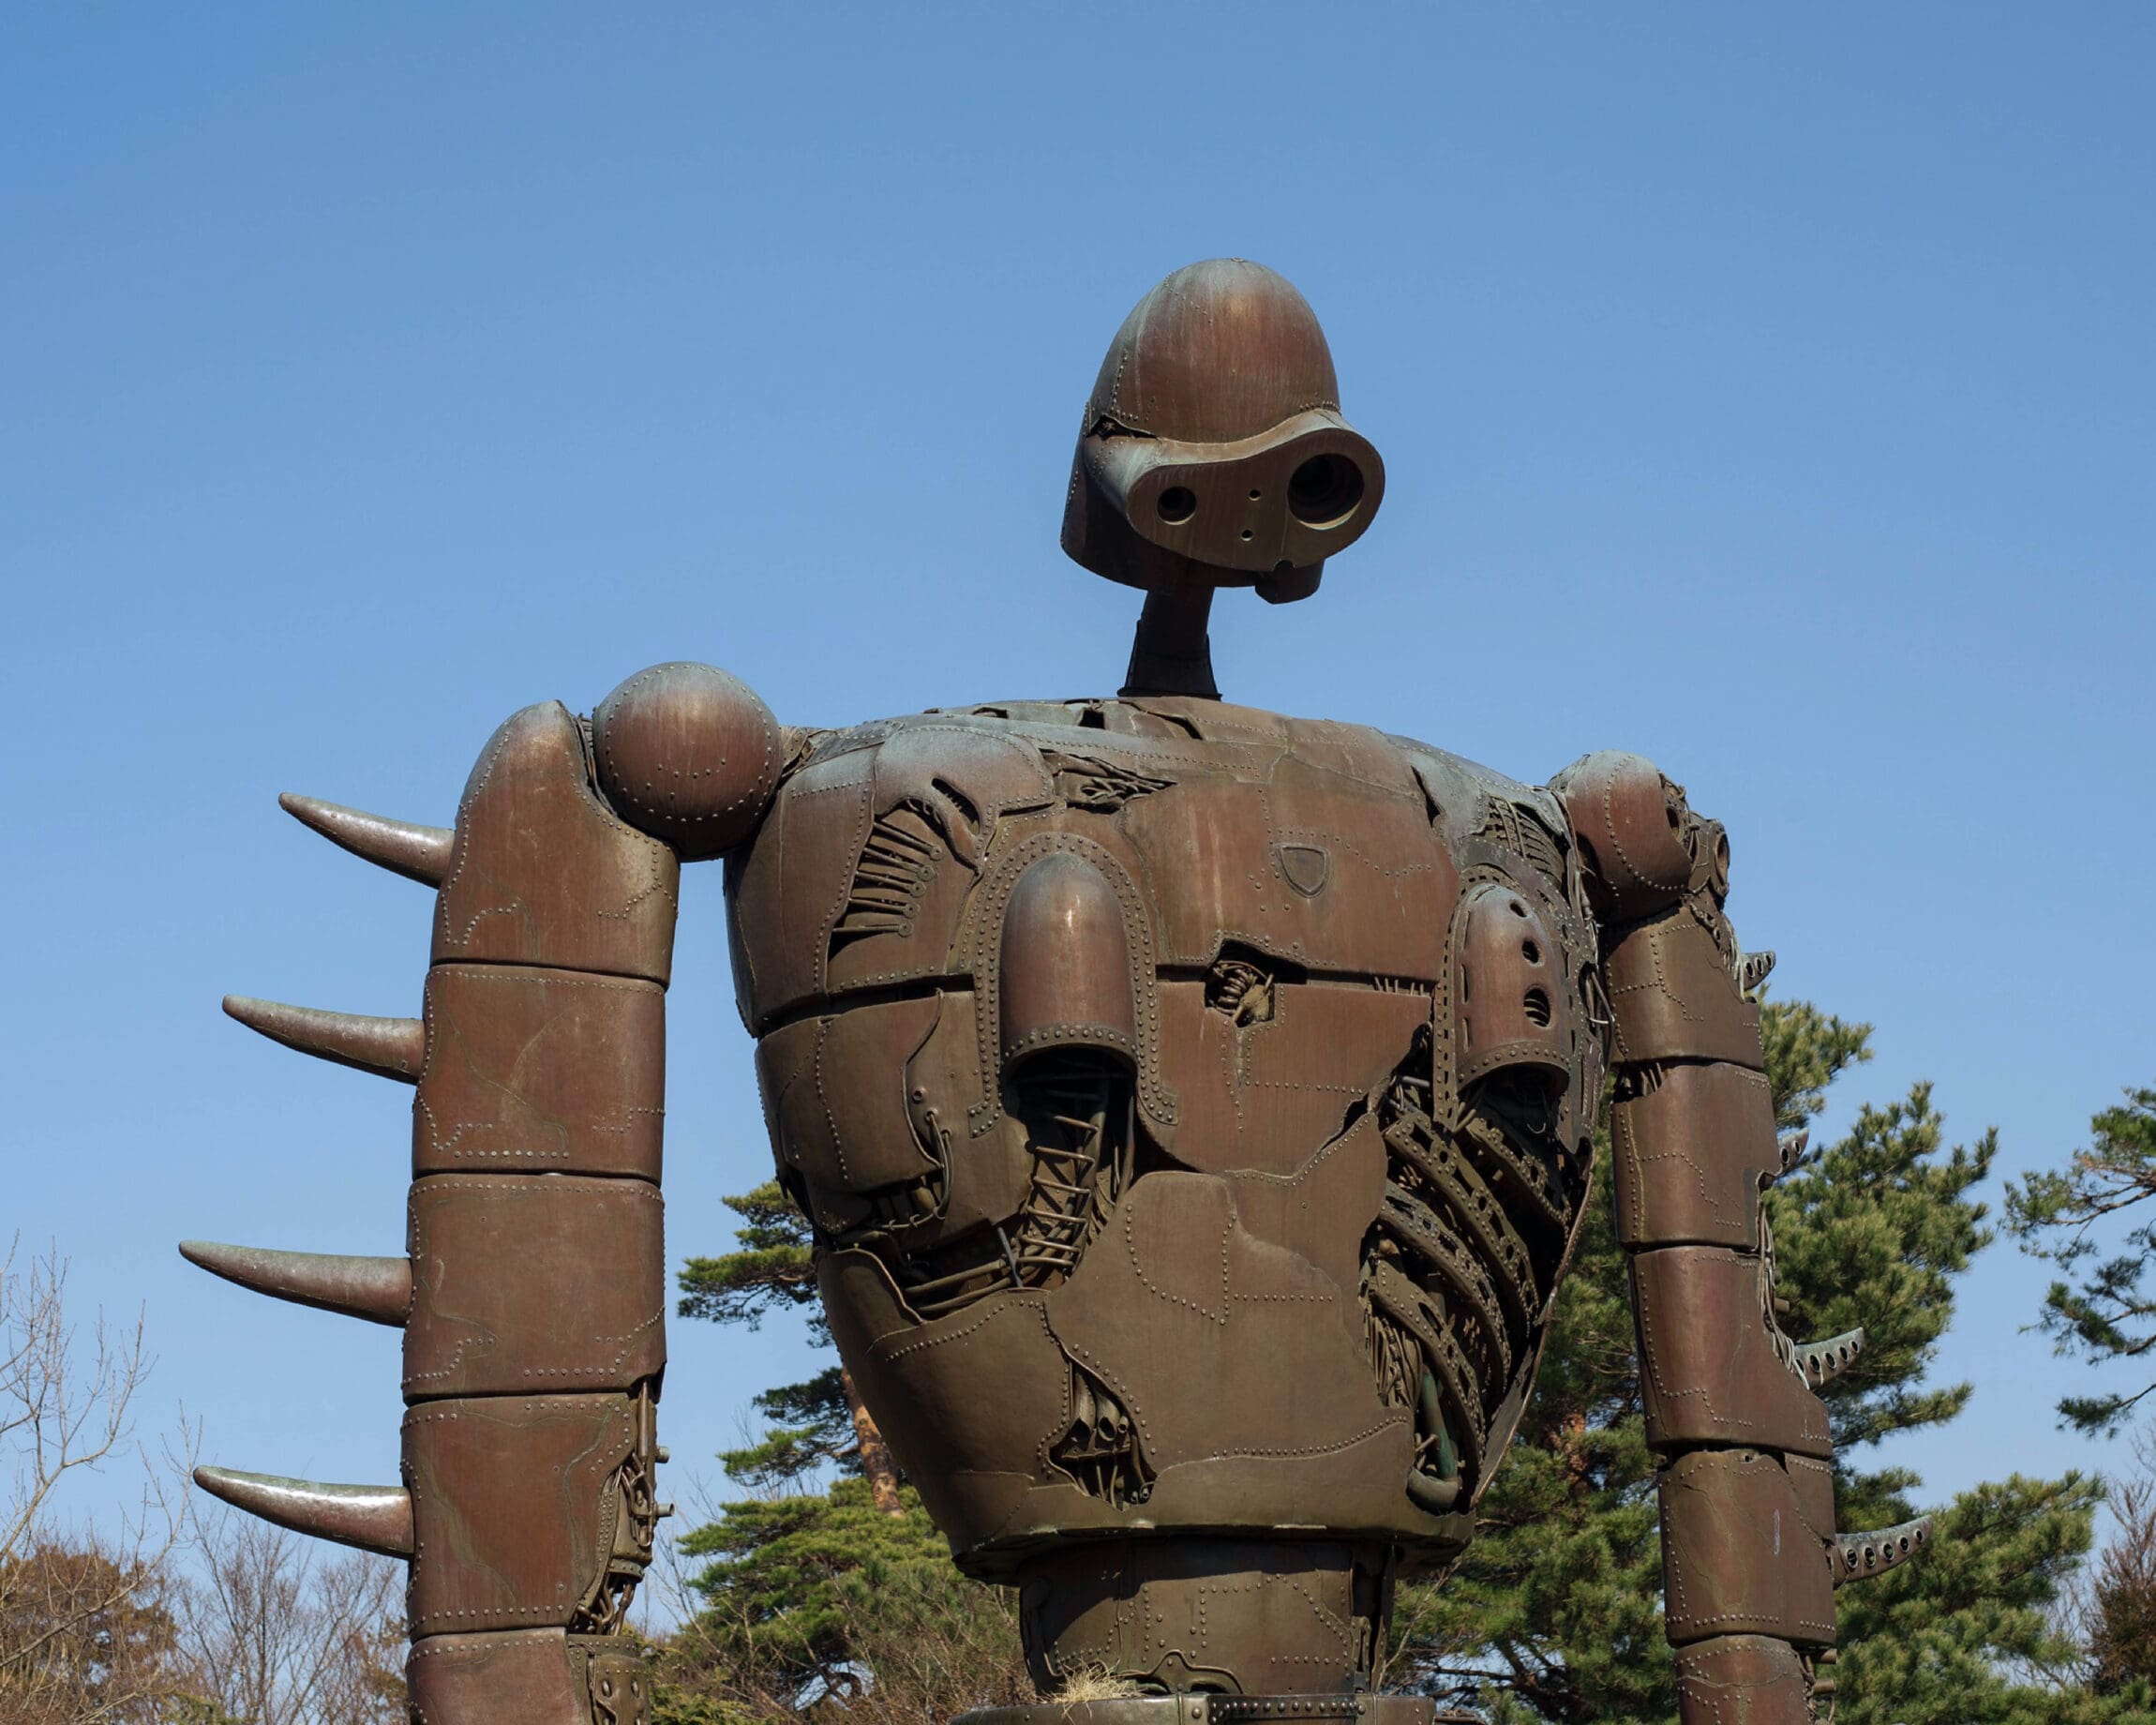 The best museums in Tokyo | The Robot Soldier on the Rooftop at Ghibli Museum